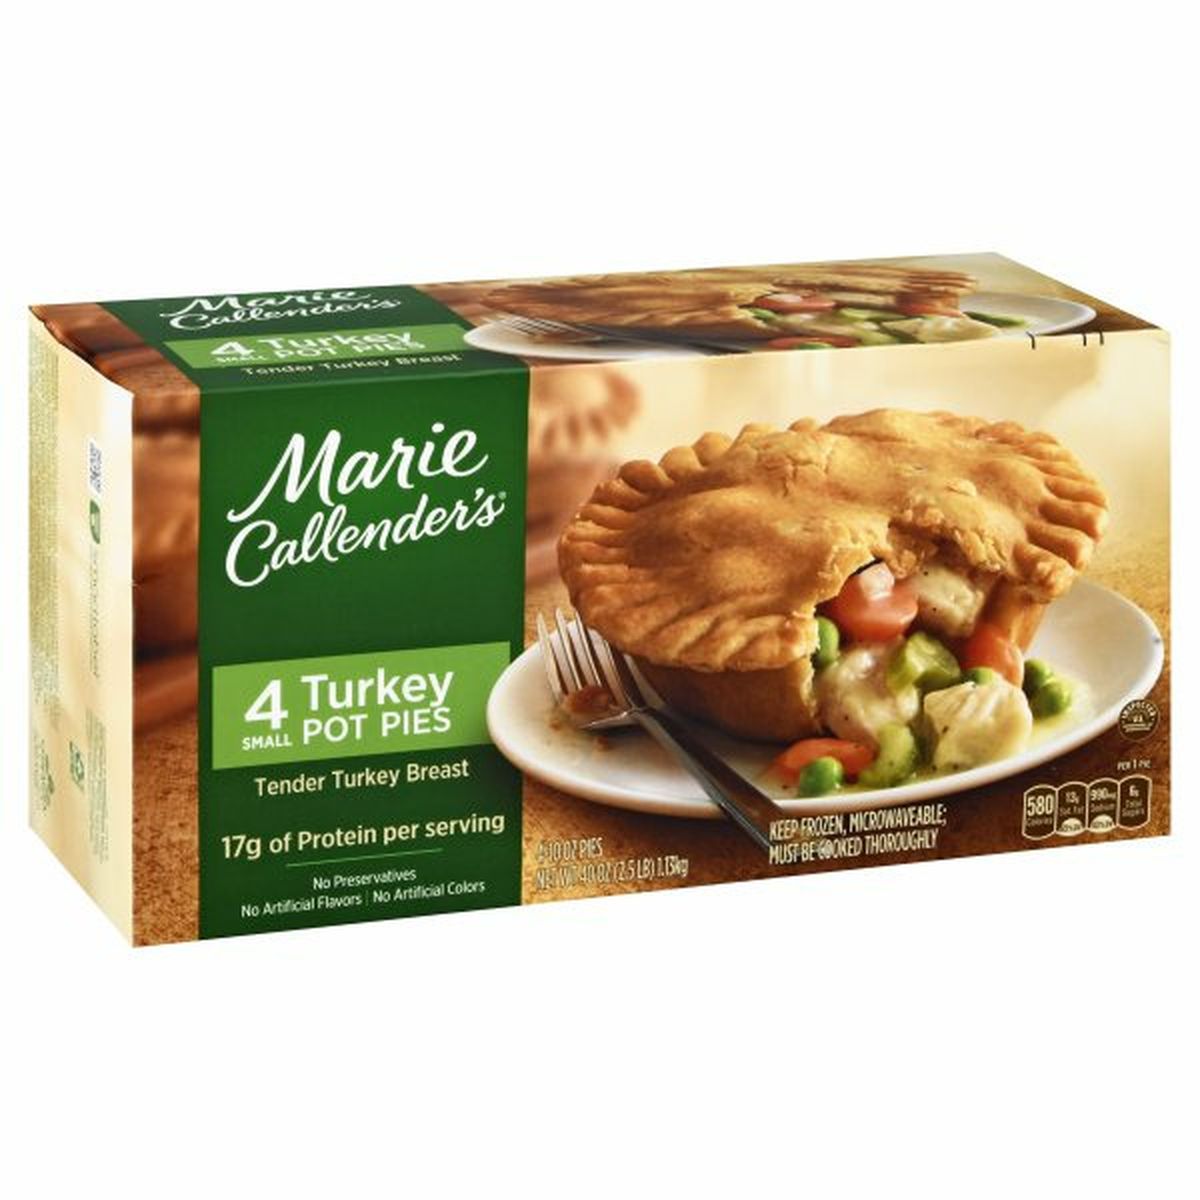 Calories in Marie Callender's Turkey Pot Pies, Small